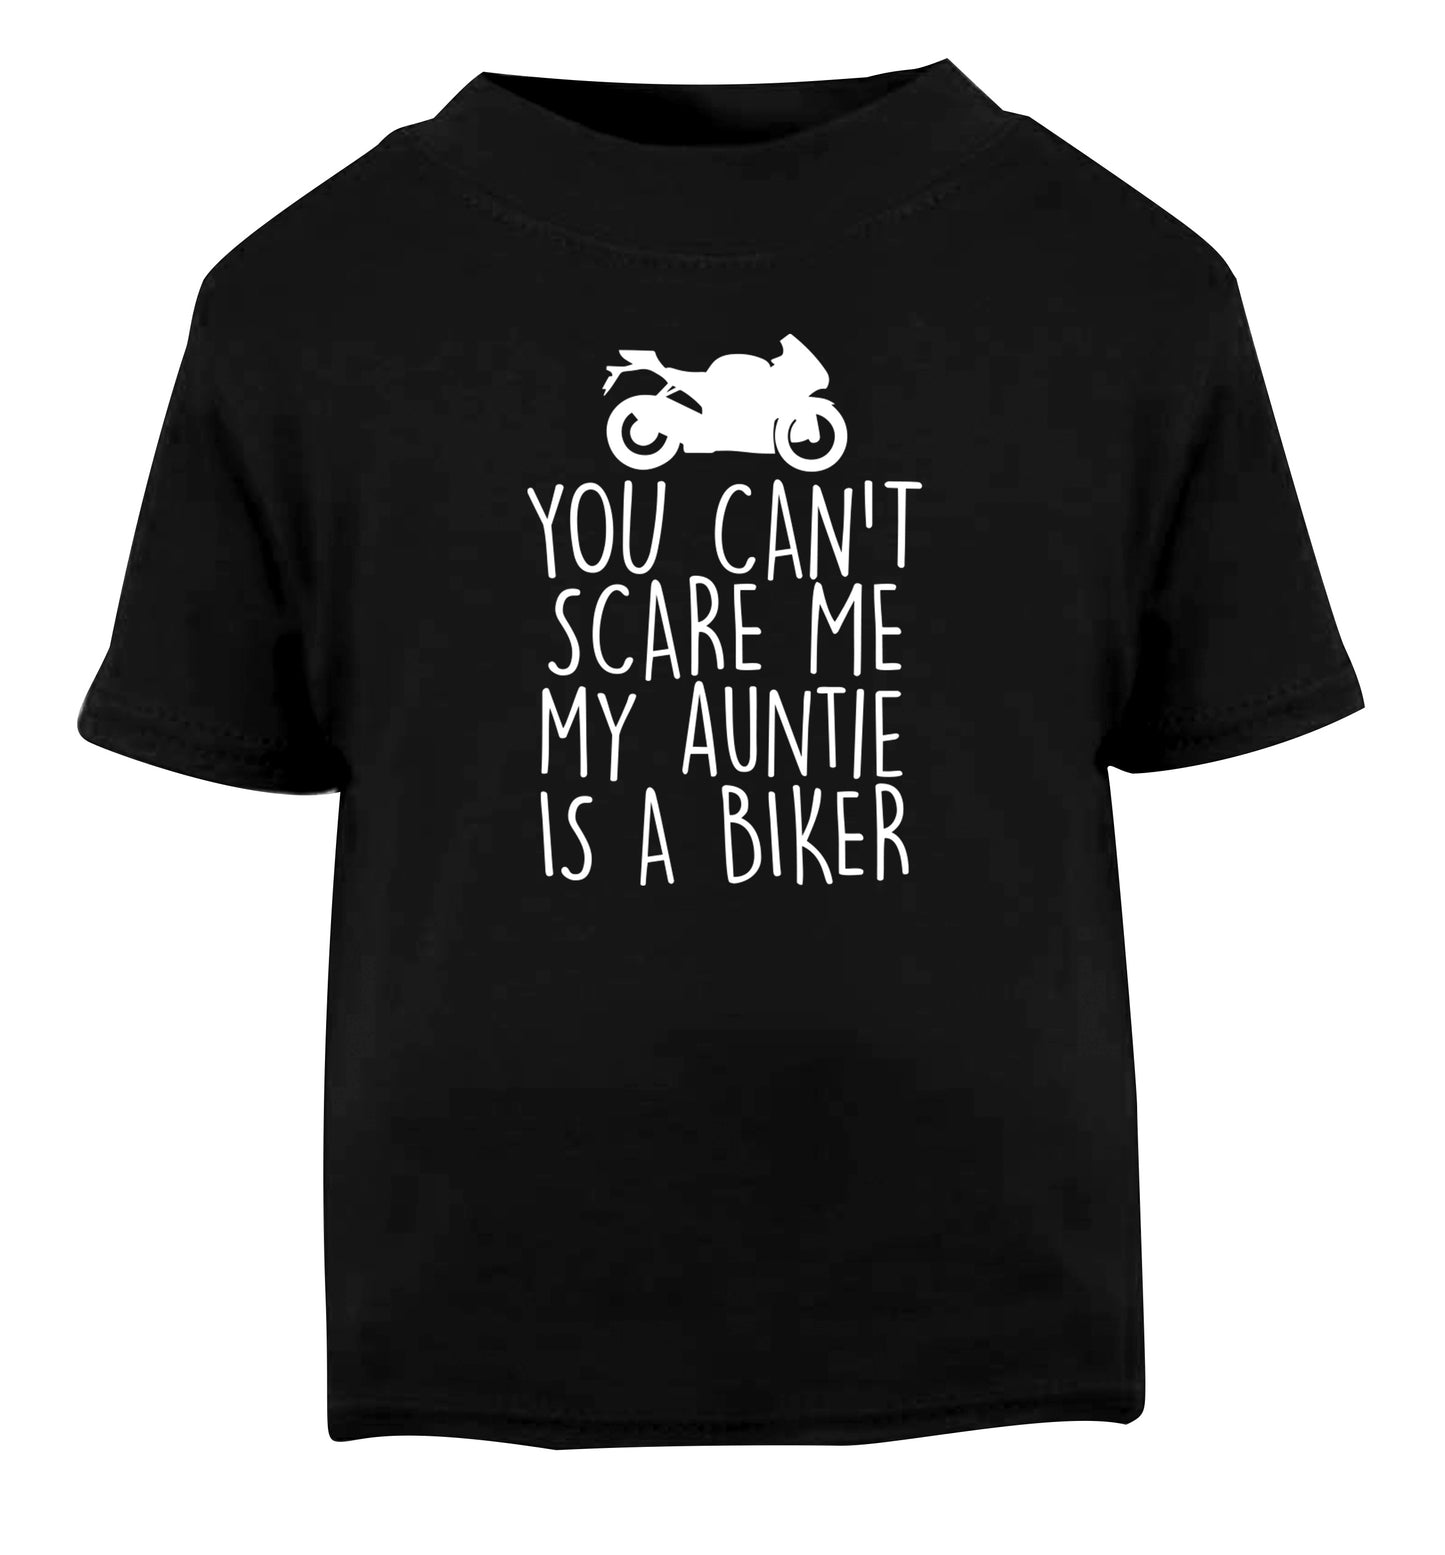 You can't scare me my auntie is a biker Black Baby Toddler Tshirt 2 years